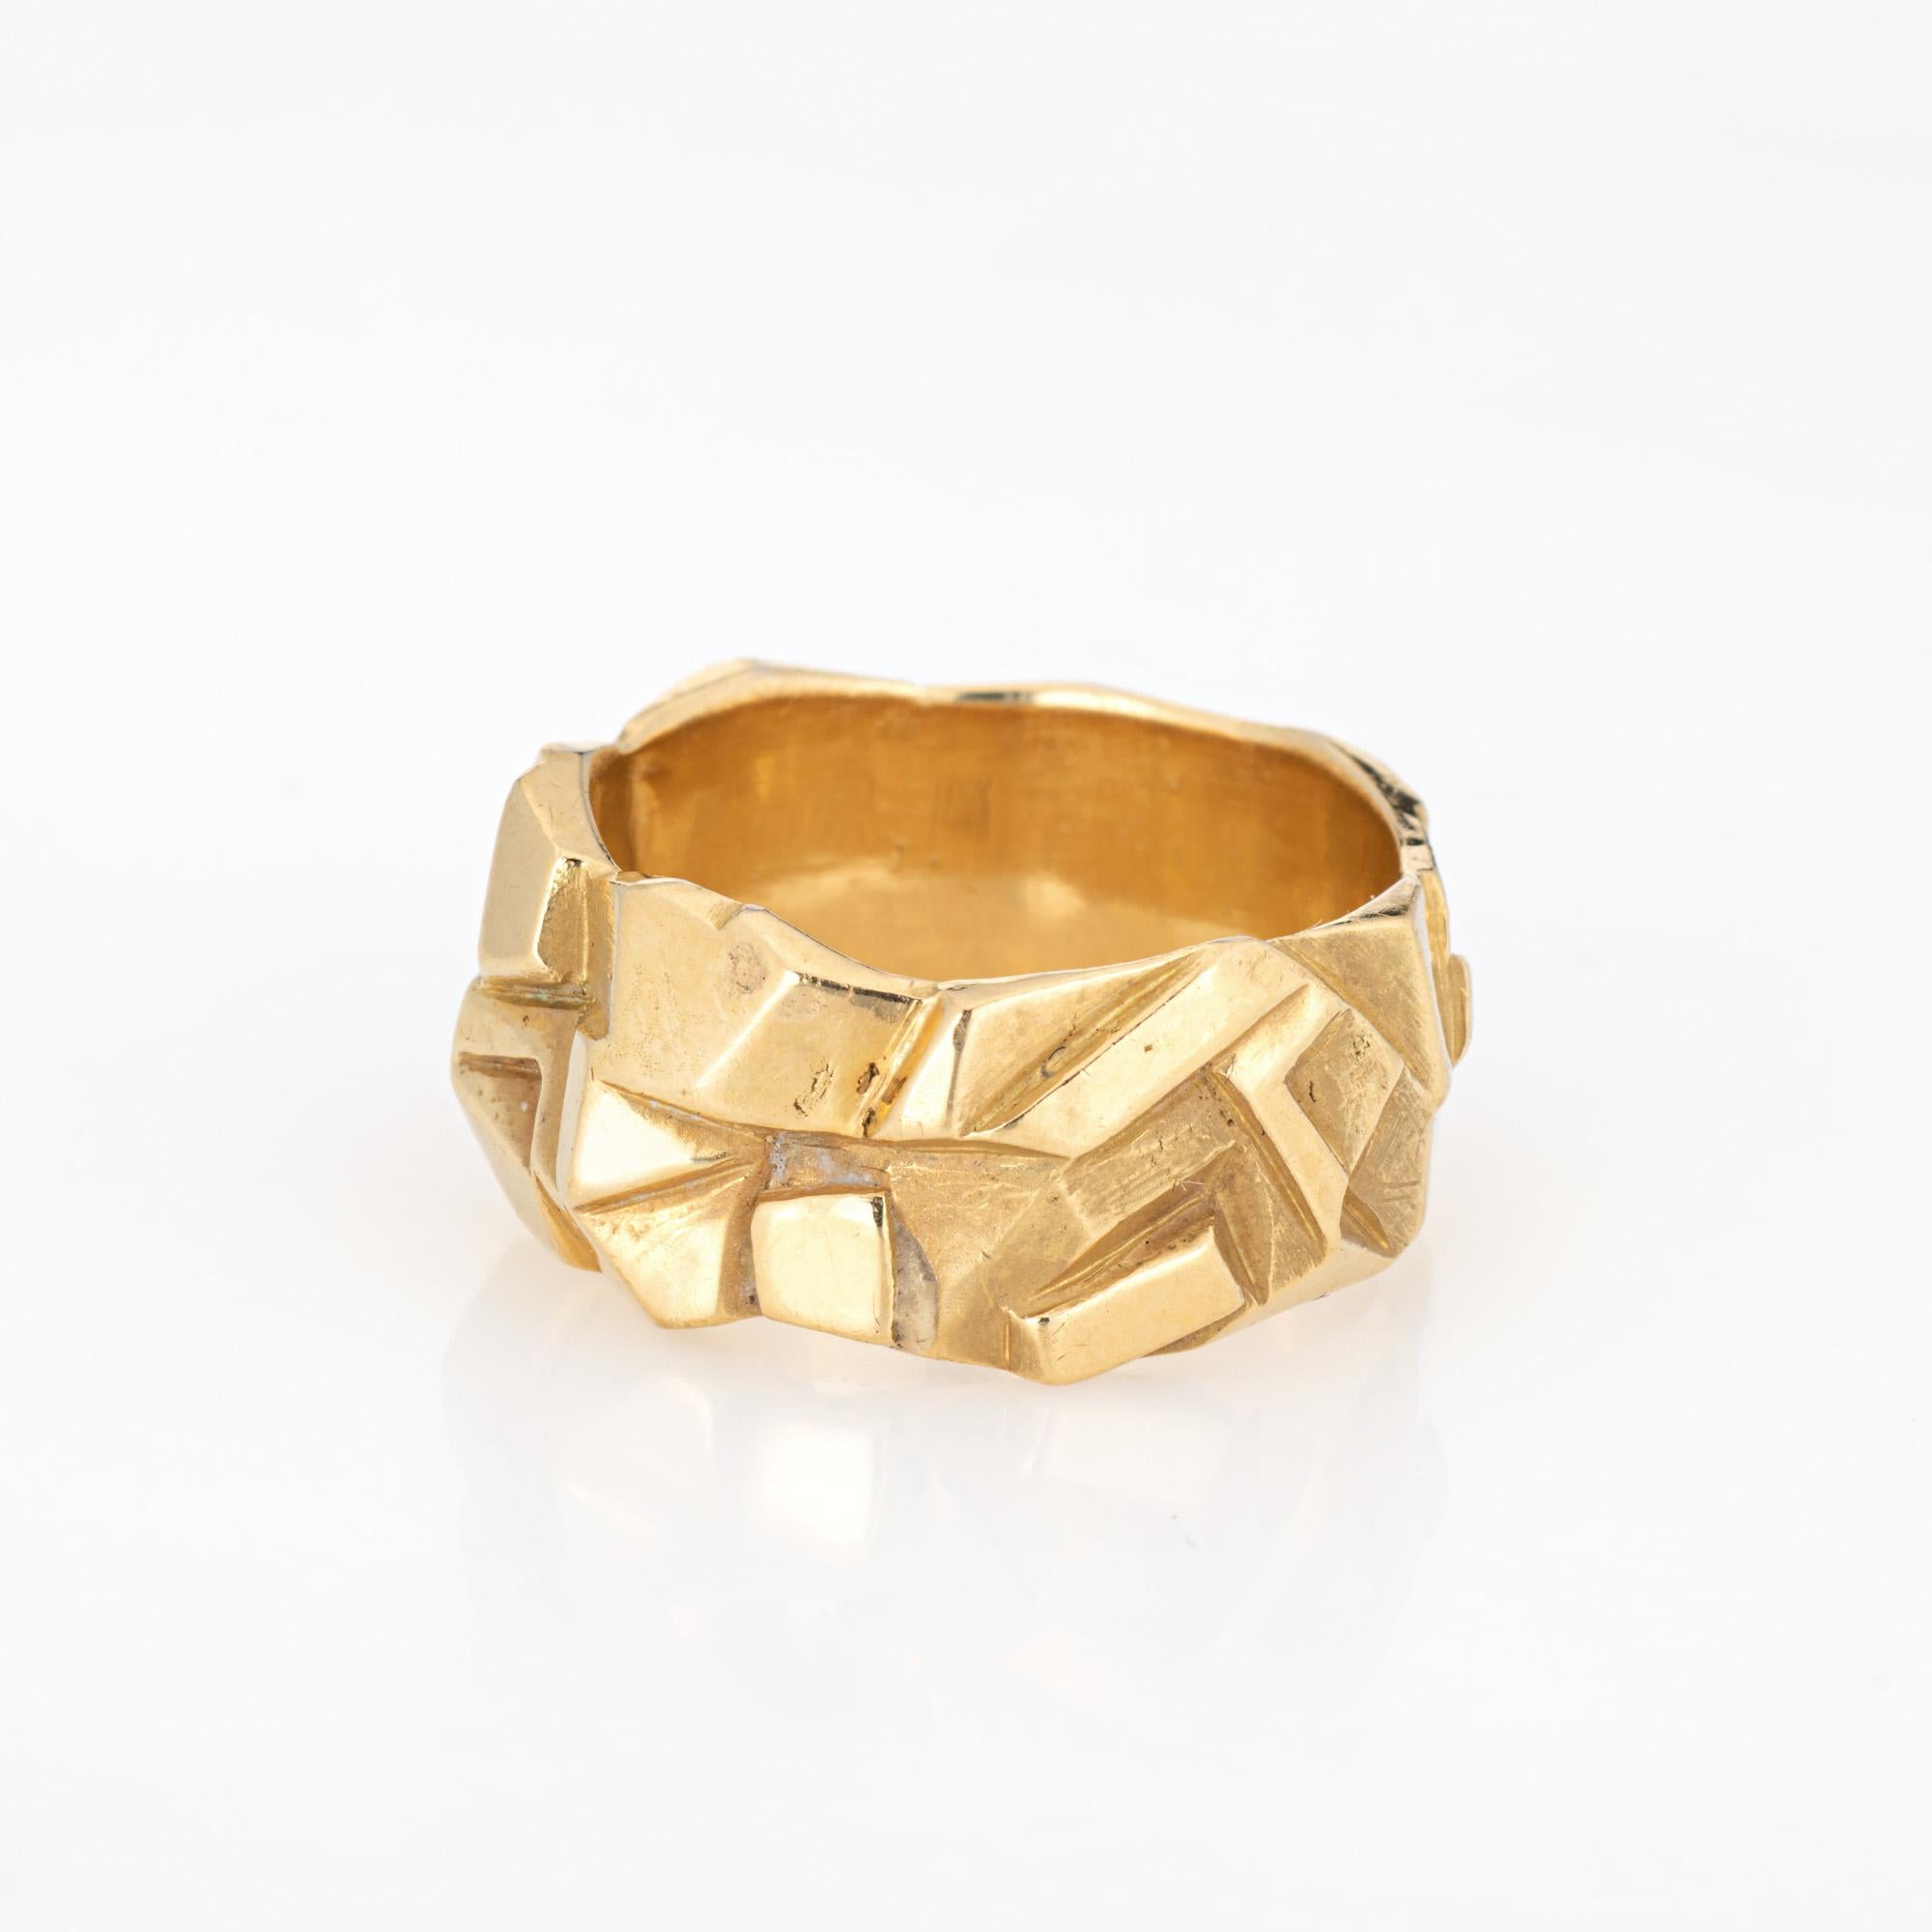 Arthur King Geometric Ring Vintage 70s Band 18k Yellow Gold Sz 6.5 Fine Jewelry In Good Condition For Sale In Torrance, CA